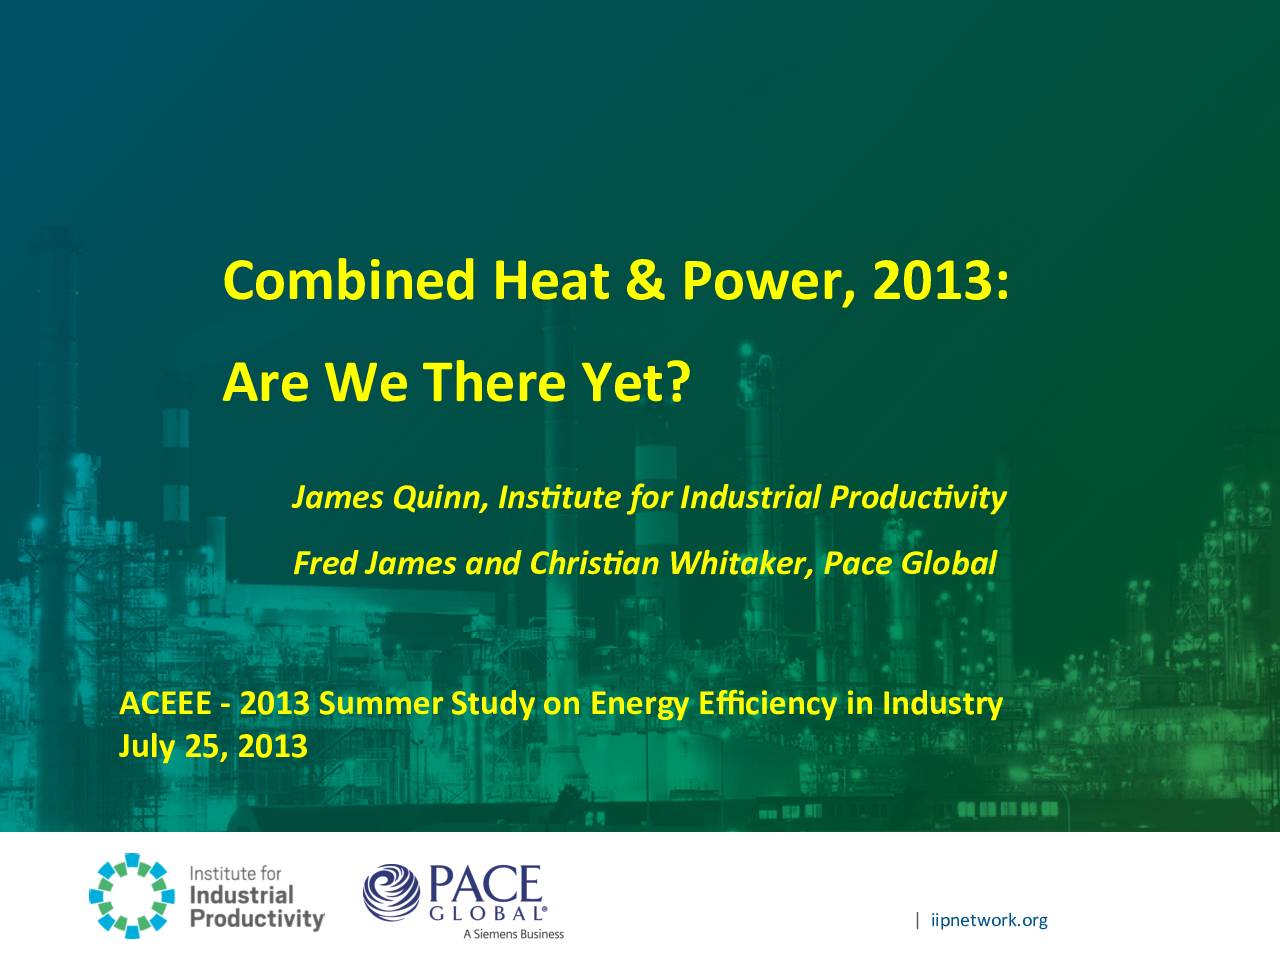 Presentation: Combined Heat & Power, 2013: Are We There Yet?